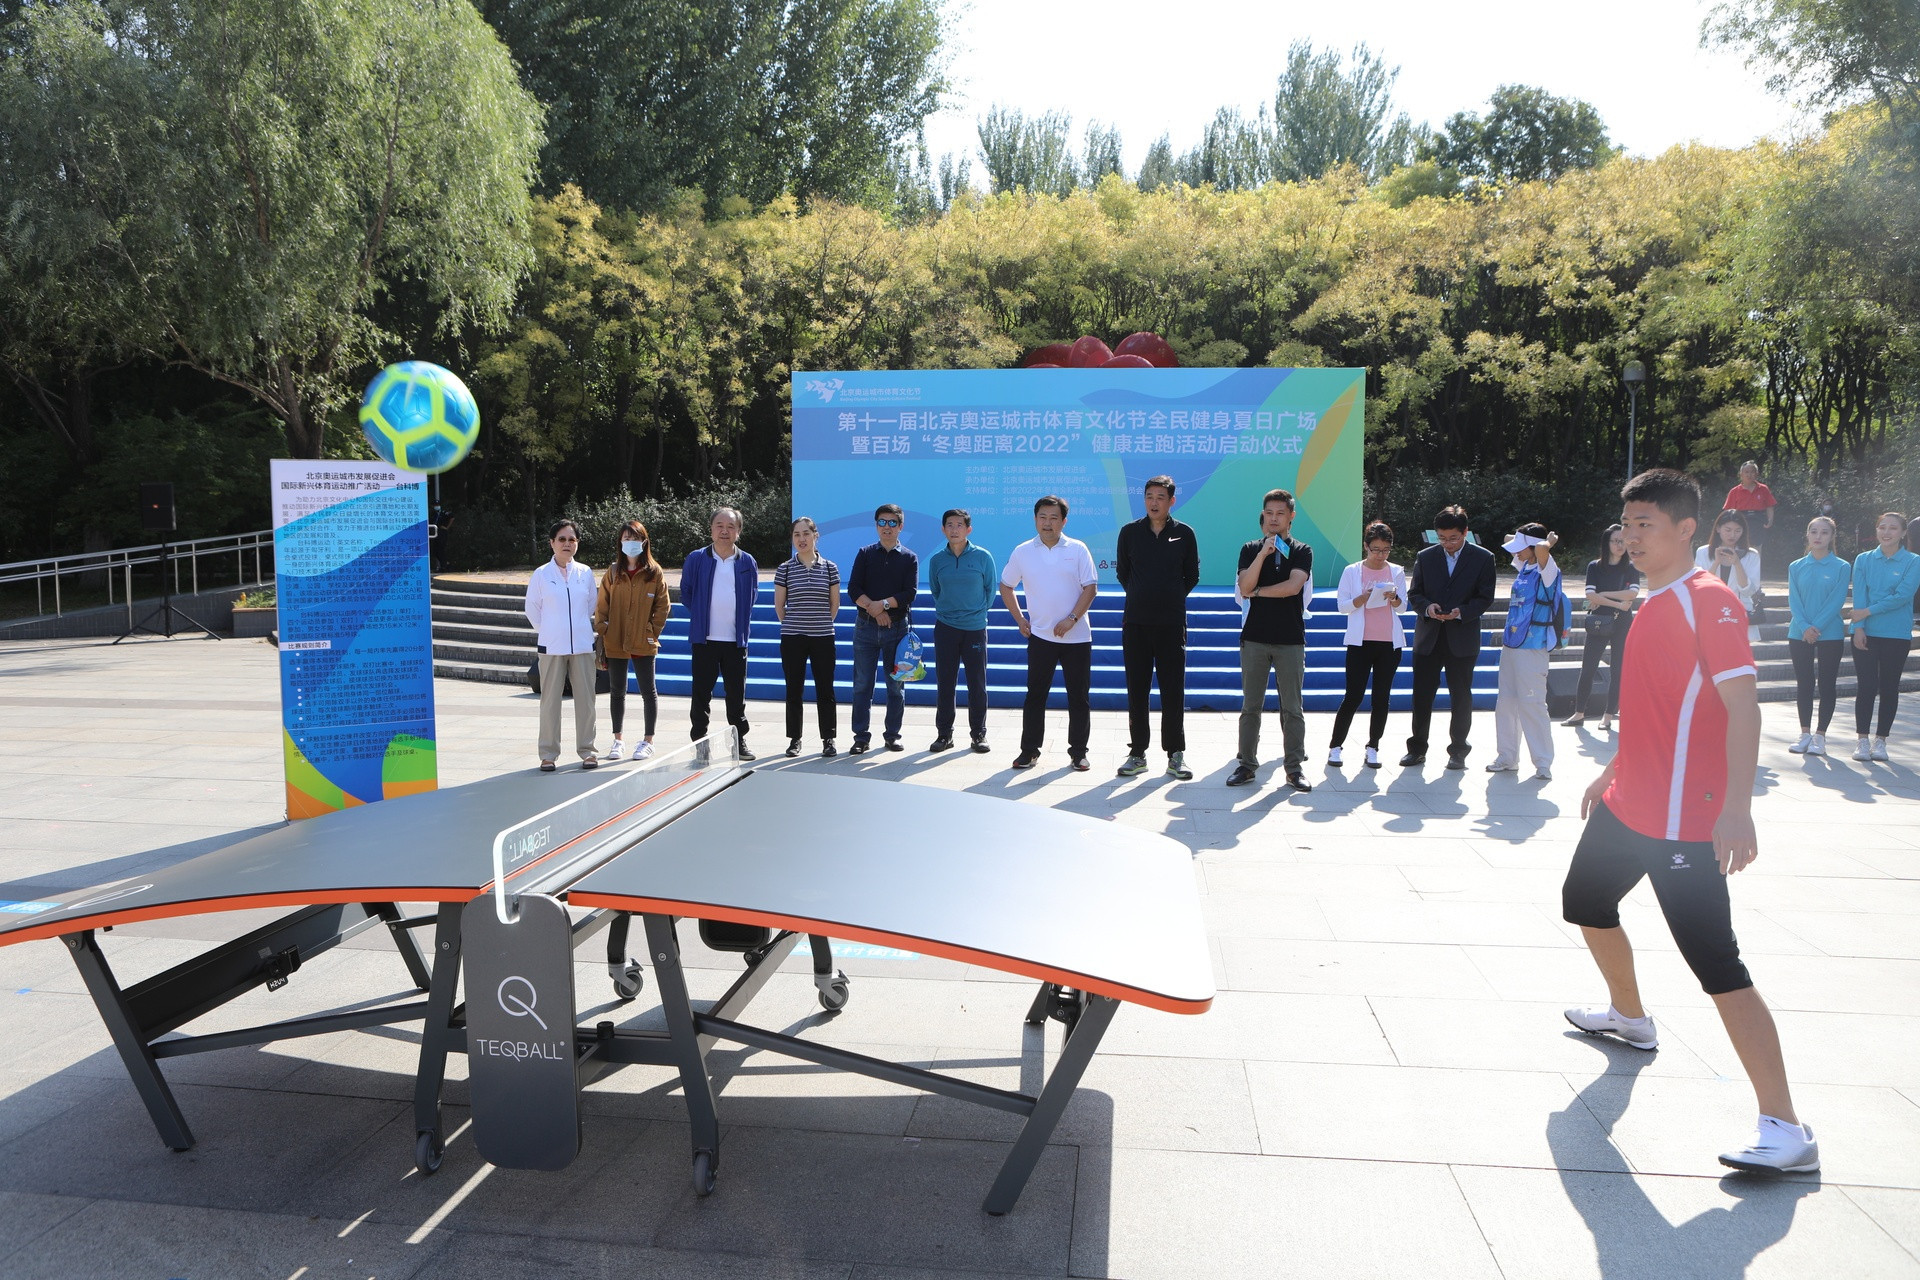 Teqball launched in Beijing as FITEQ partners with Olympic City Development Association